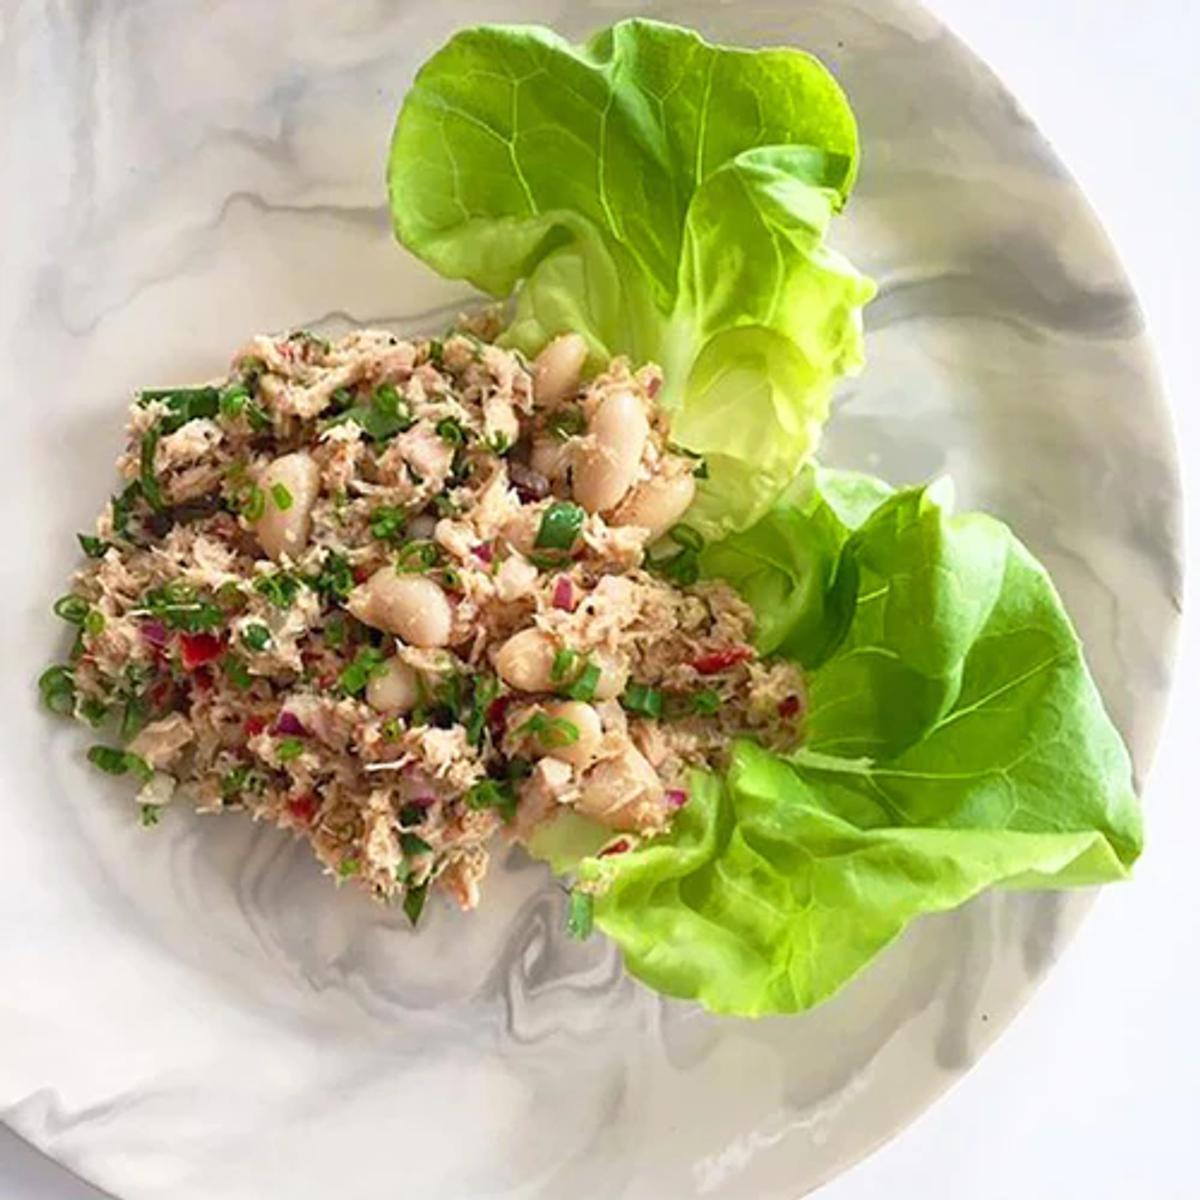 Lettuce wraps filled with mayo-free tuna salad 